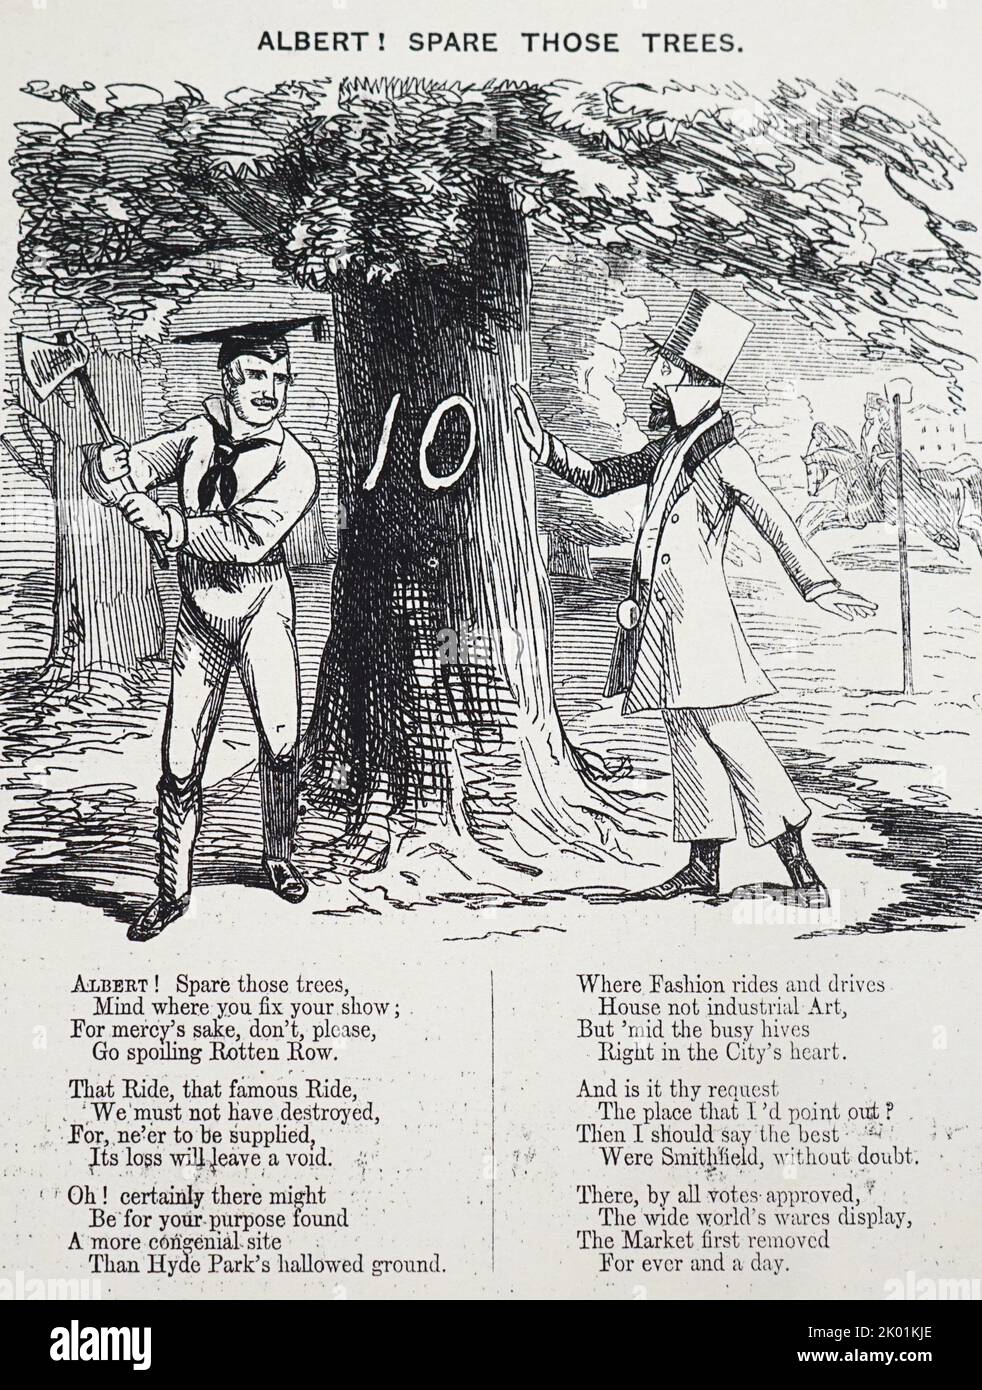 Prince Albert being urged to think before felling trees in Hyde Park to make way for the Crystal Palace and the Great Exhibition of 1851. From Punch, London, 1850. Stock Photo